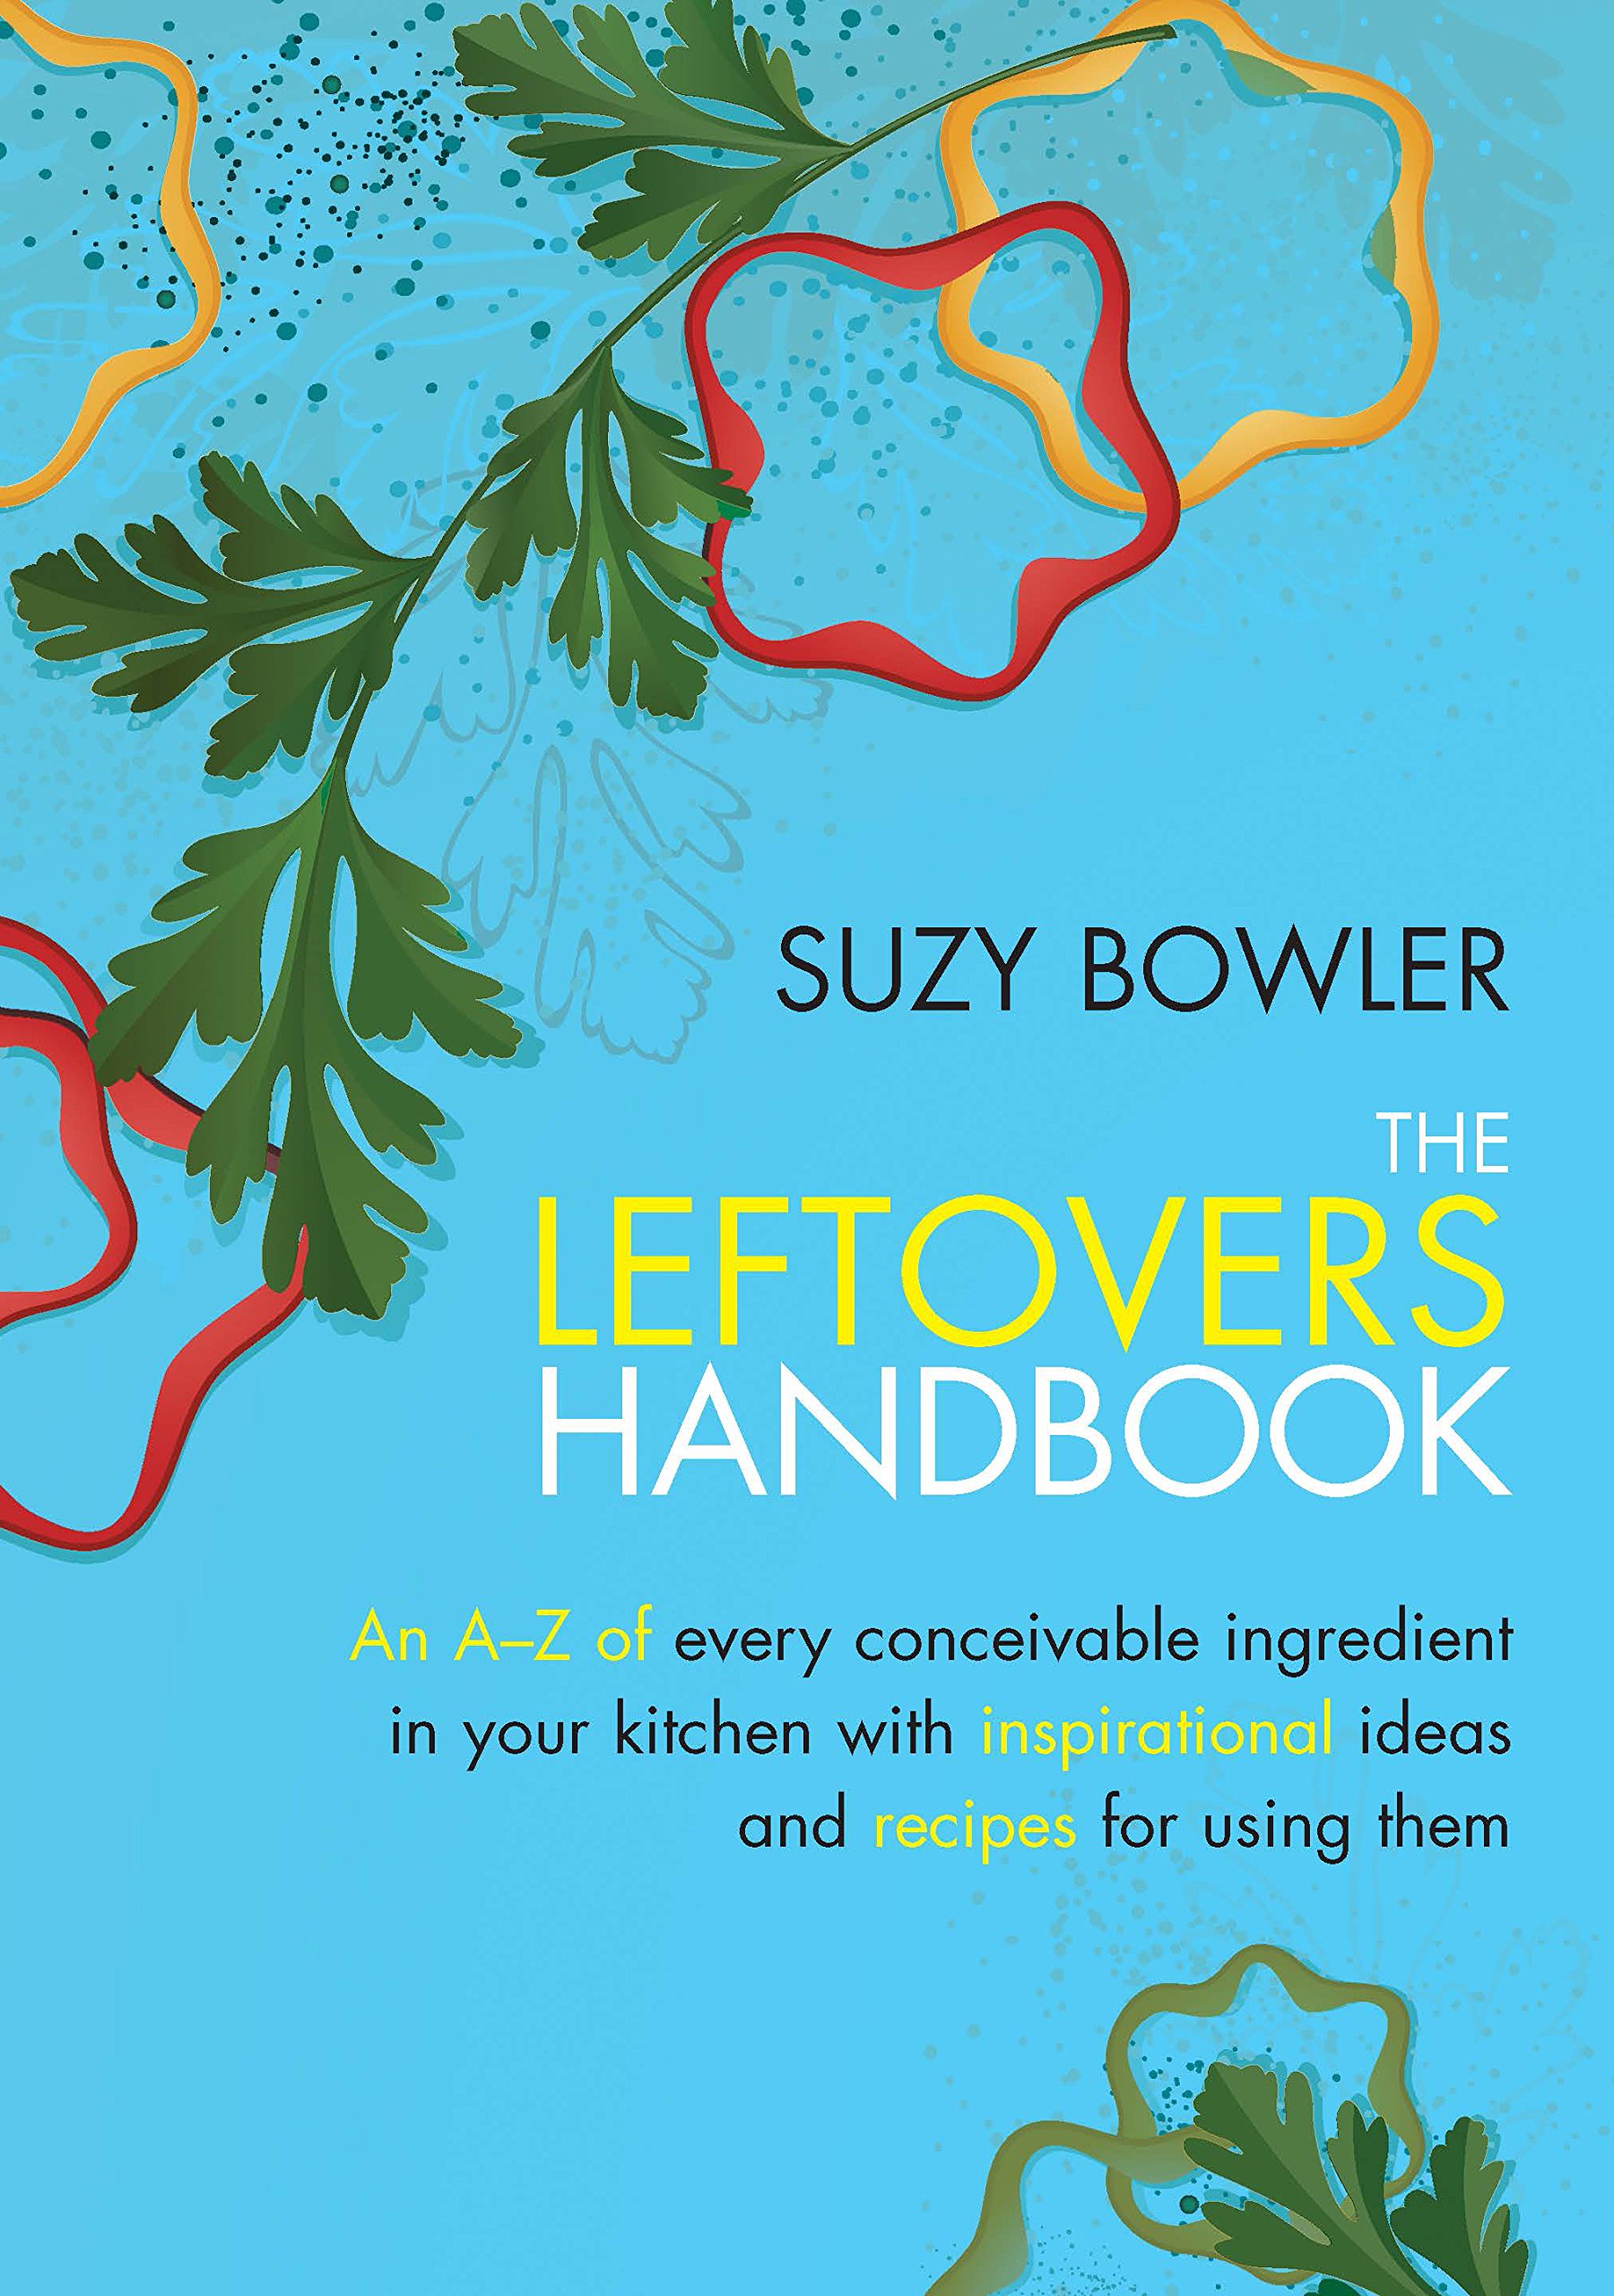 The Leftovers Handbook: A-Z of Every Ingredient In Your Kitchen with Inspirational Ideas For Using Them